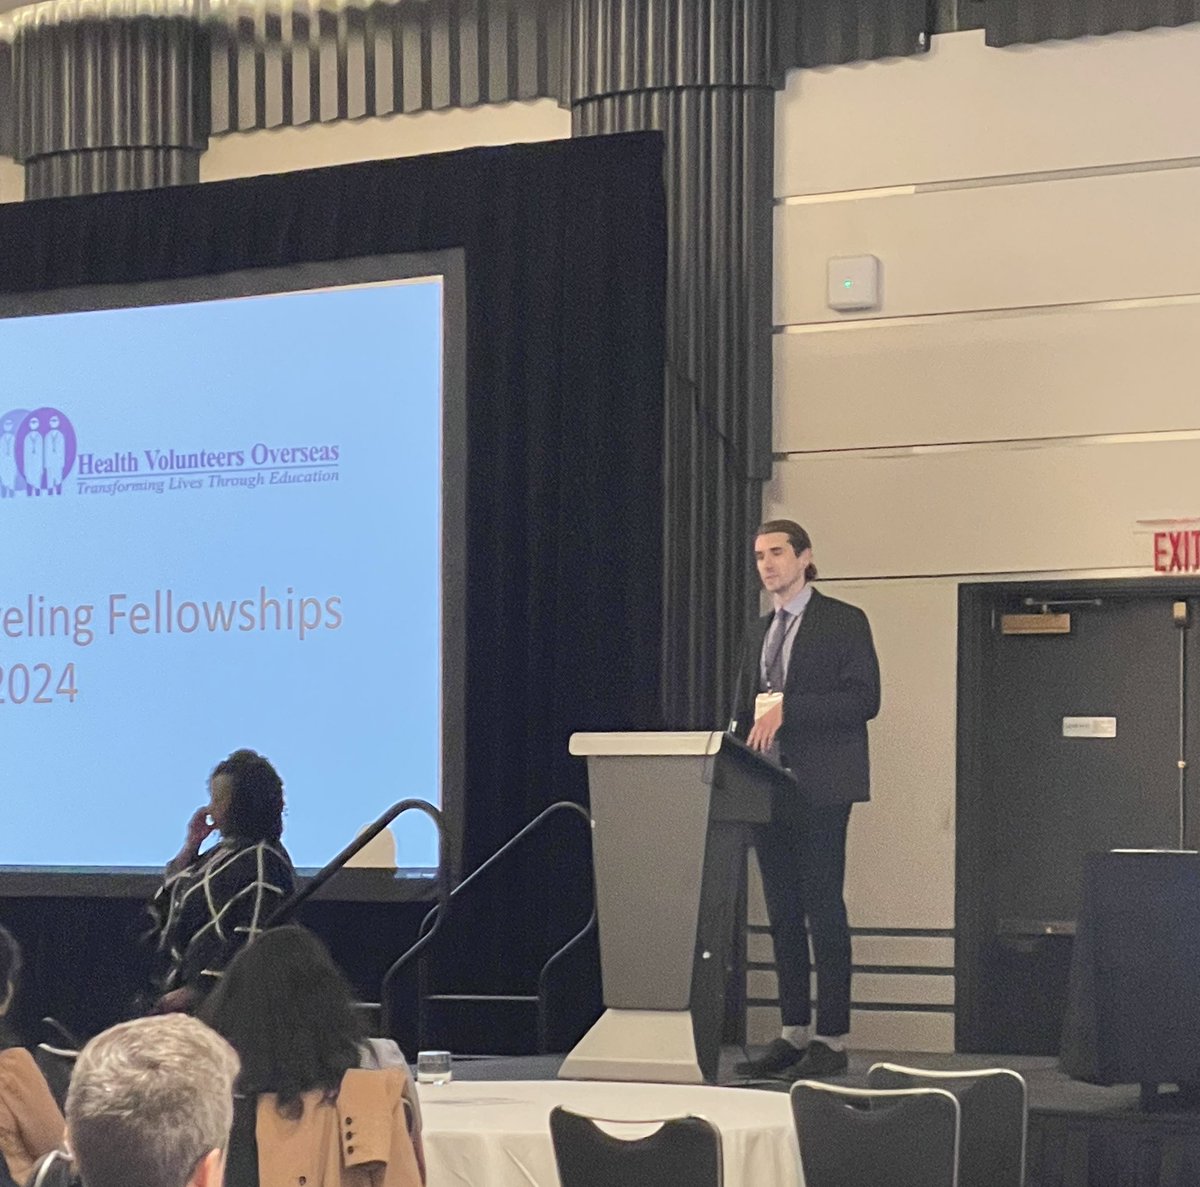 So proud of all-star CA2 Dr. Braydon Bak, receiving the SEA/HVO traveling fellowship! Congratulations to all the 2024 fellows! @MayoAnesthesia @MayoAnesRes @SEAnesHQ @jeffreyhuangmd @emilysharpe @PeaceEnehMD